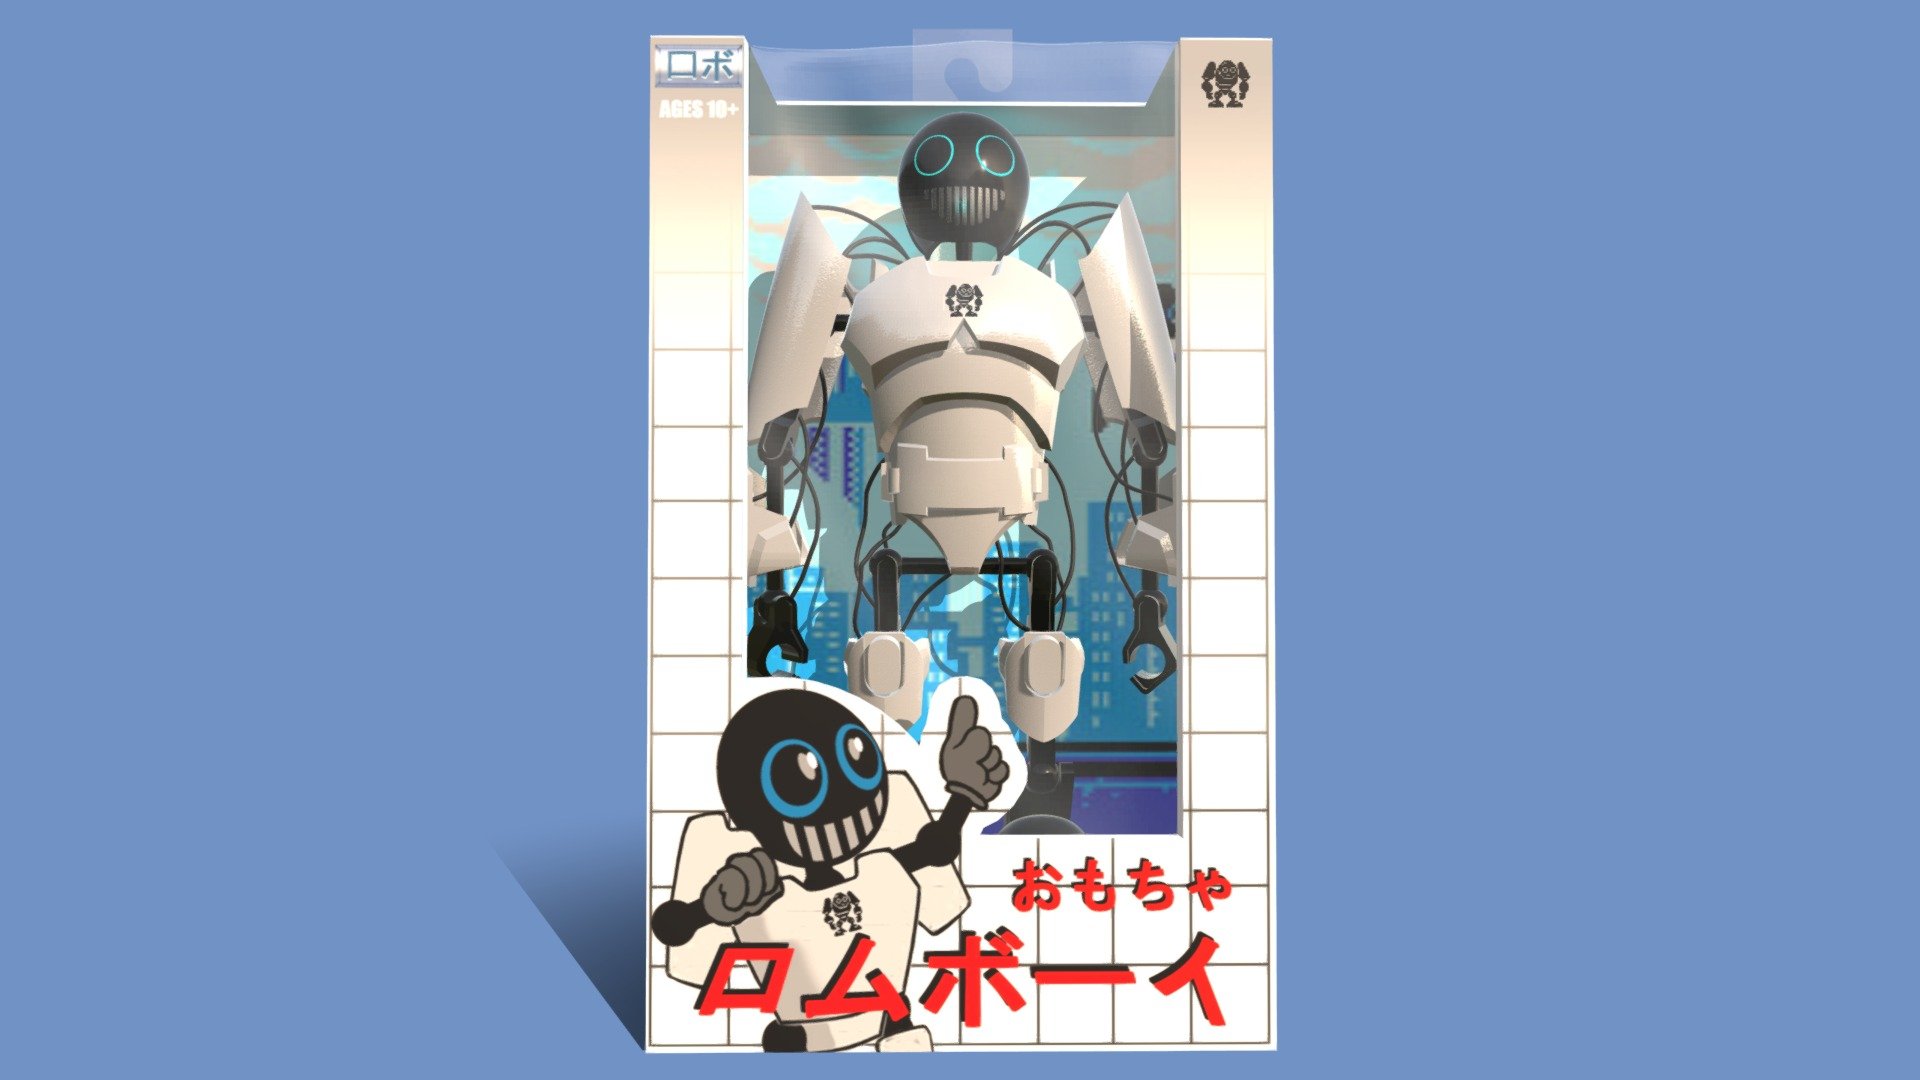 It's the Japanese edition of  ロムボーイ / ROM BOY - my new action figure. He is still inside his packaging, ready to be unboxed. Get your ROM BOY action figure today!

While stocks last 3d model